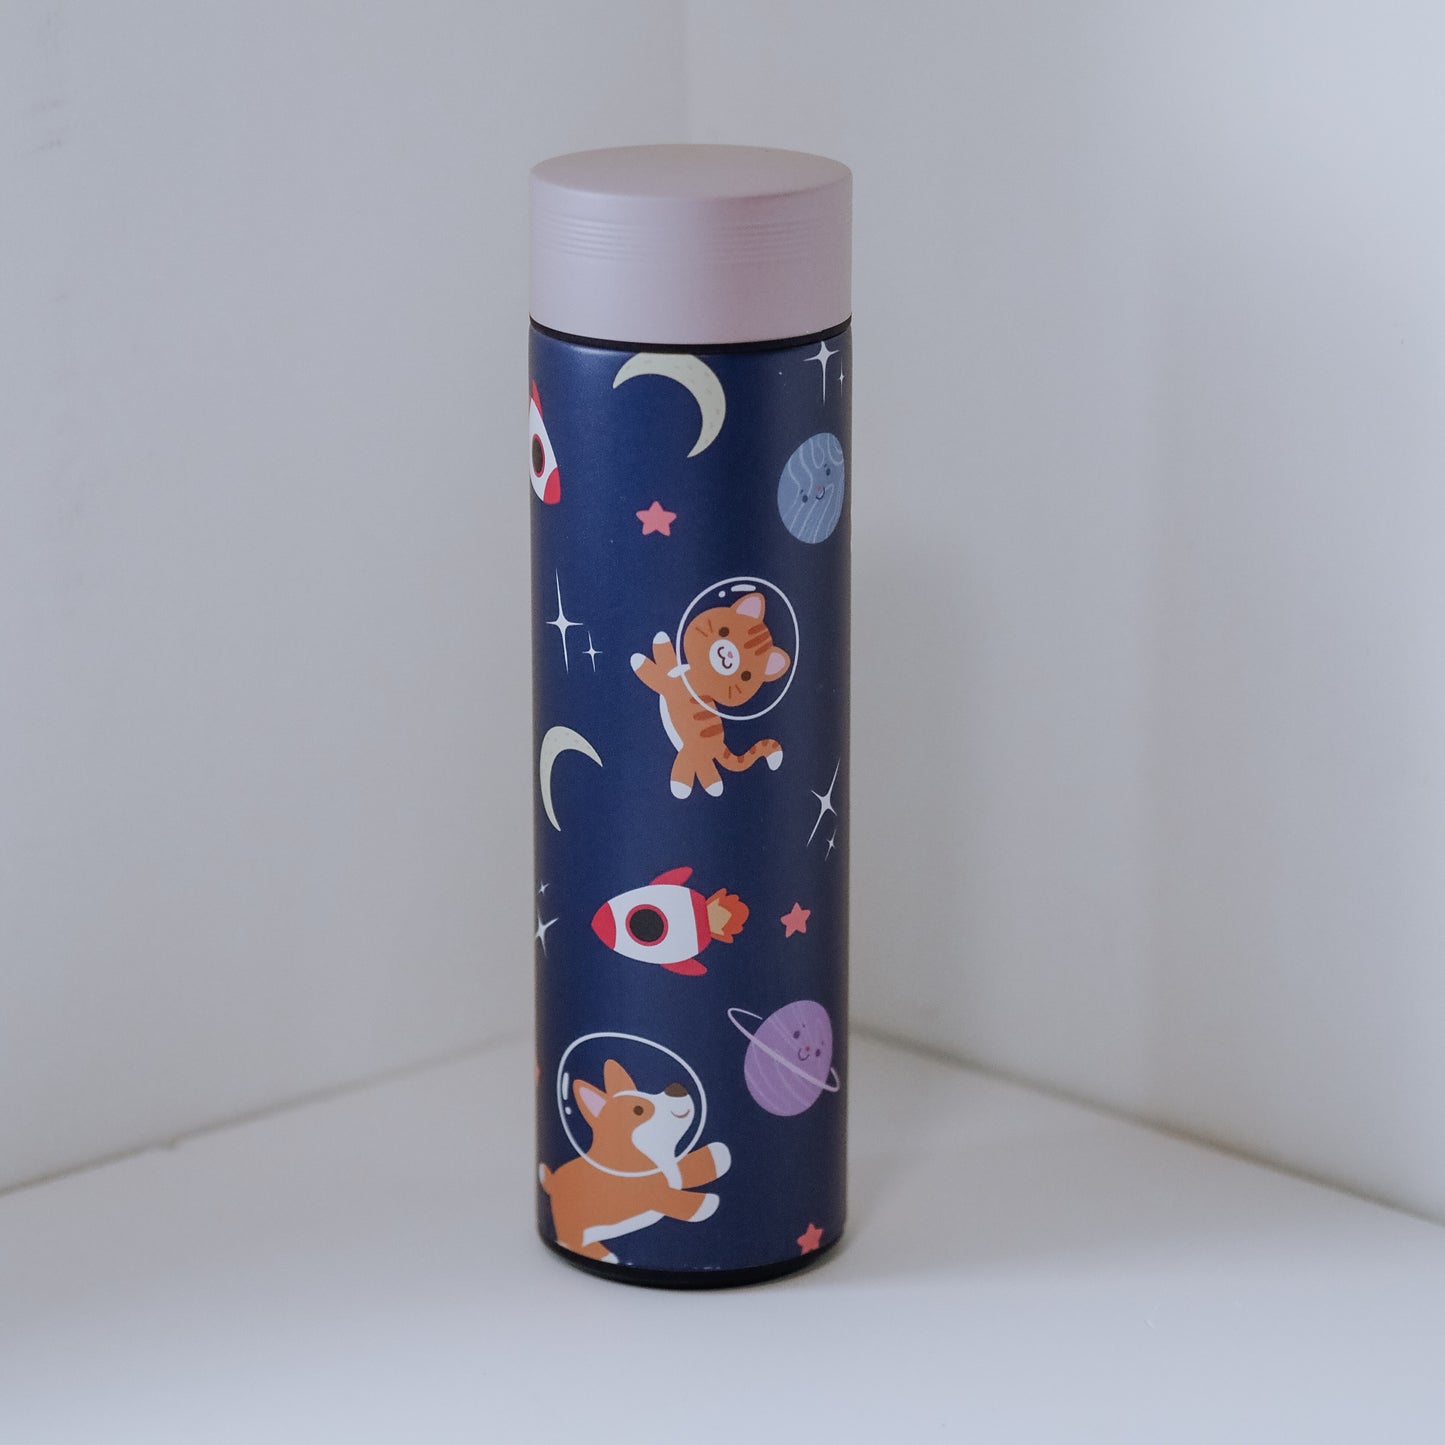 Space Stainless Steel Tumbler (450ml)